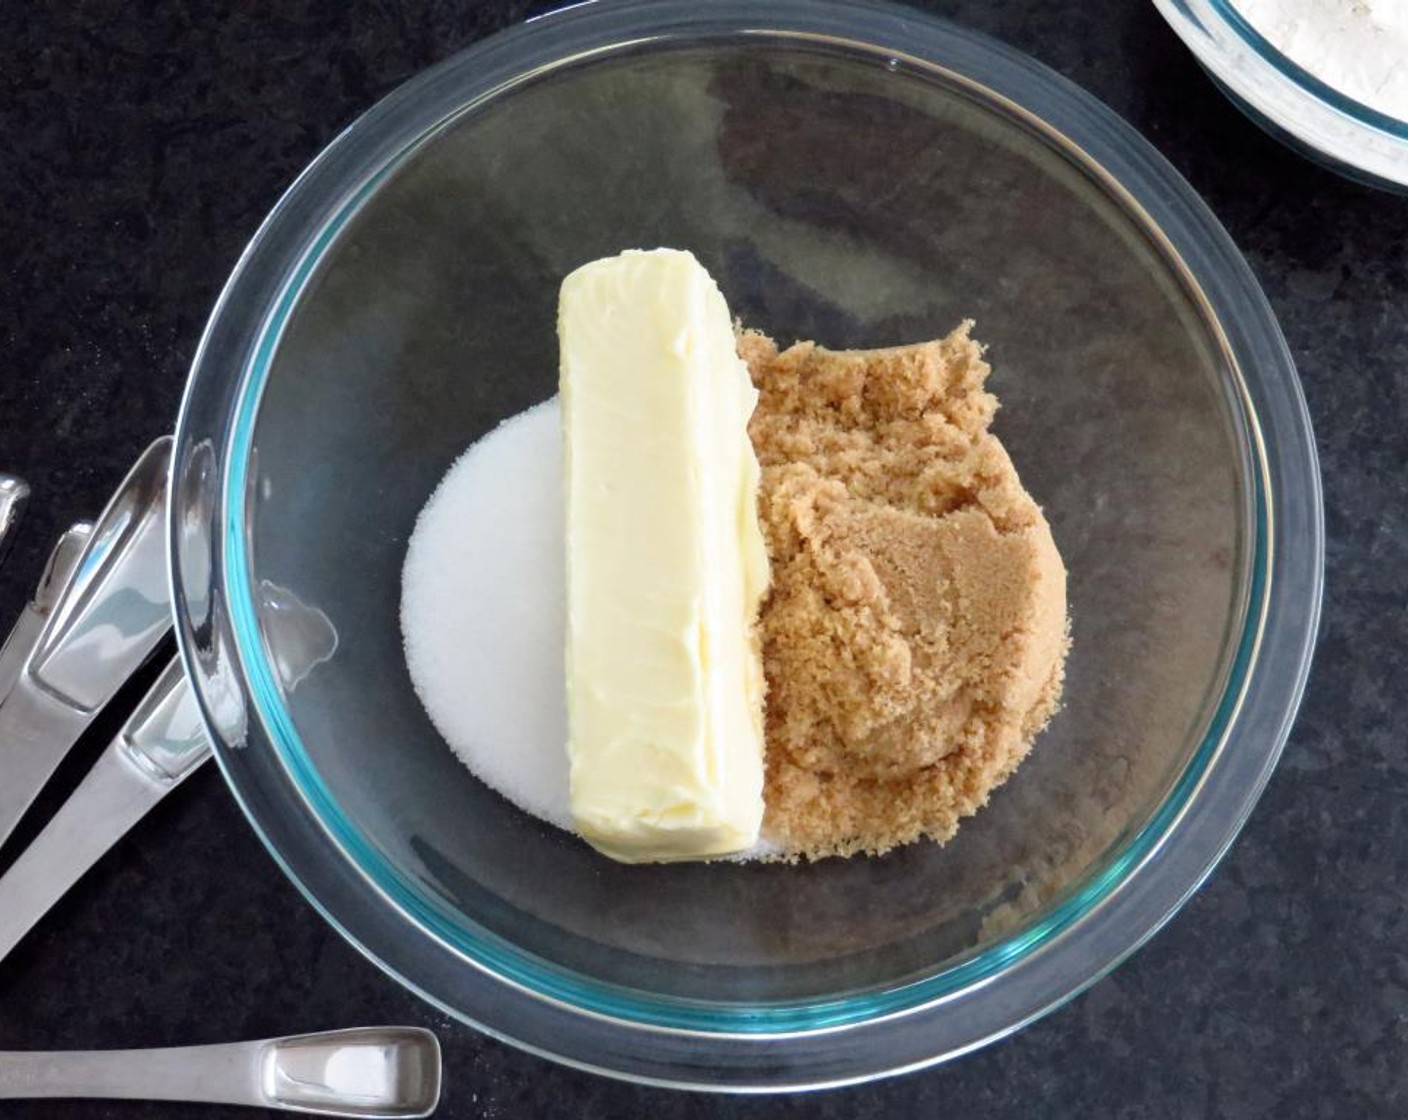 step 3 In a large bowl, combine softened Unsalted Butter (1/2 cup), Brown Sugar (1/2 cup) and Granulated Sugar (1/2 cup) With a hand mixer on medium speed, cream together until light and fluffy.